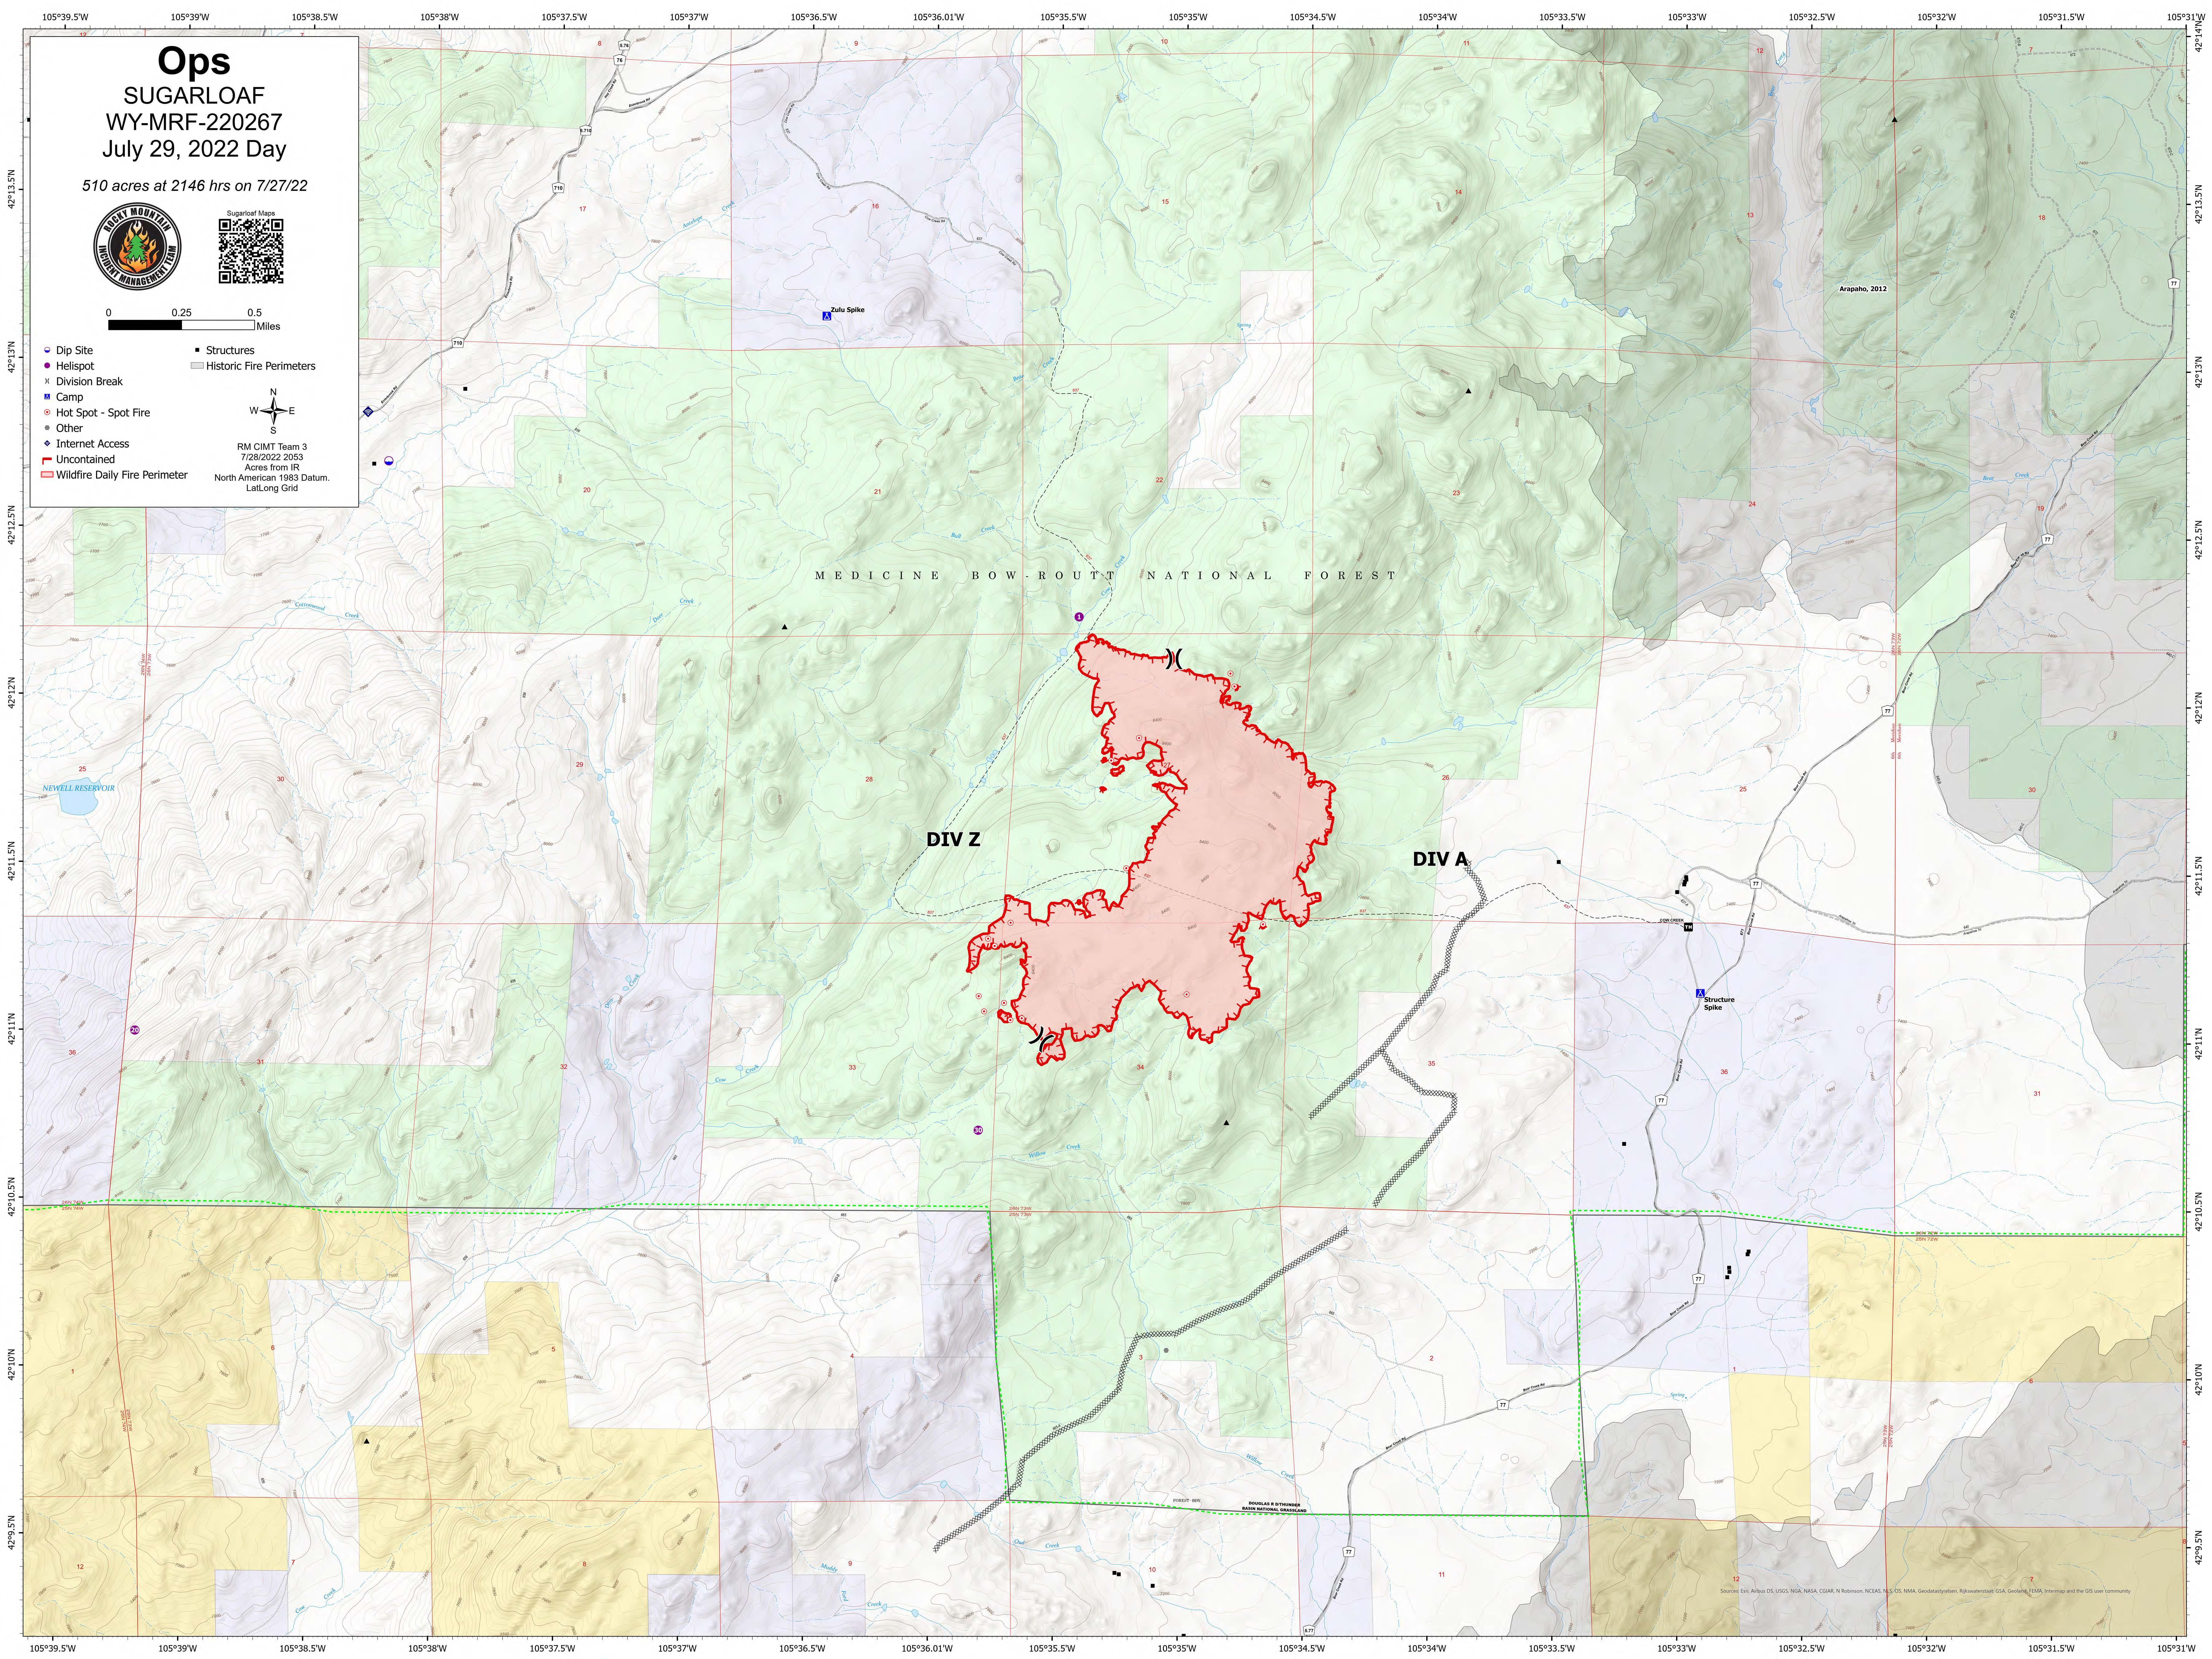 Sugarloaf Fire Operations Map for July 29